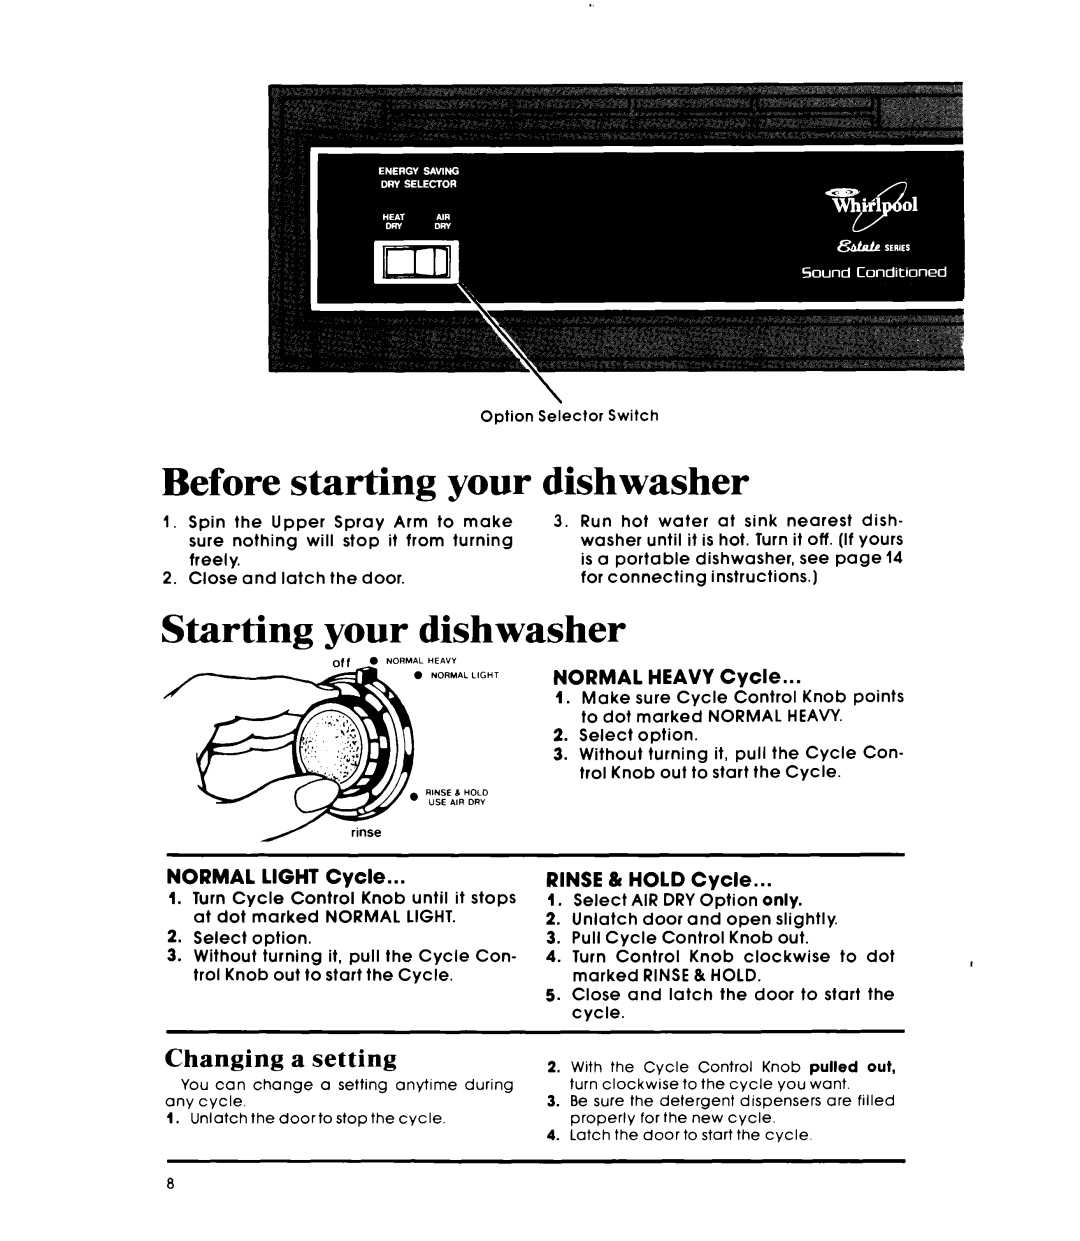 Whirlpool DU3040XP manual Before starting your, Starting your dishwasher, Changing a setting, NORMAL HEAVY Cvcle 